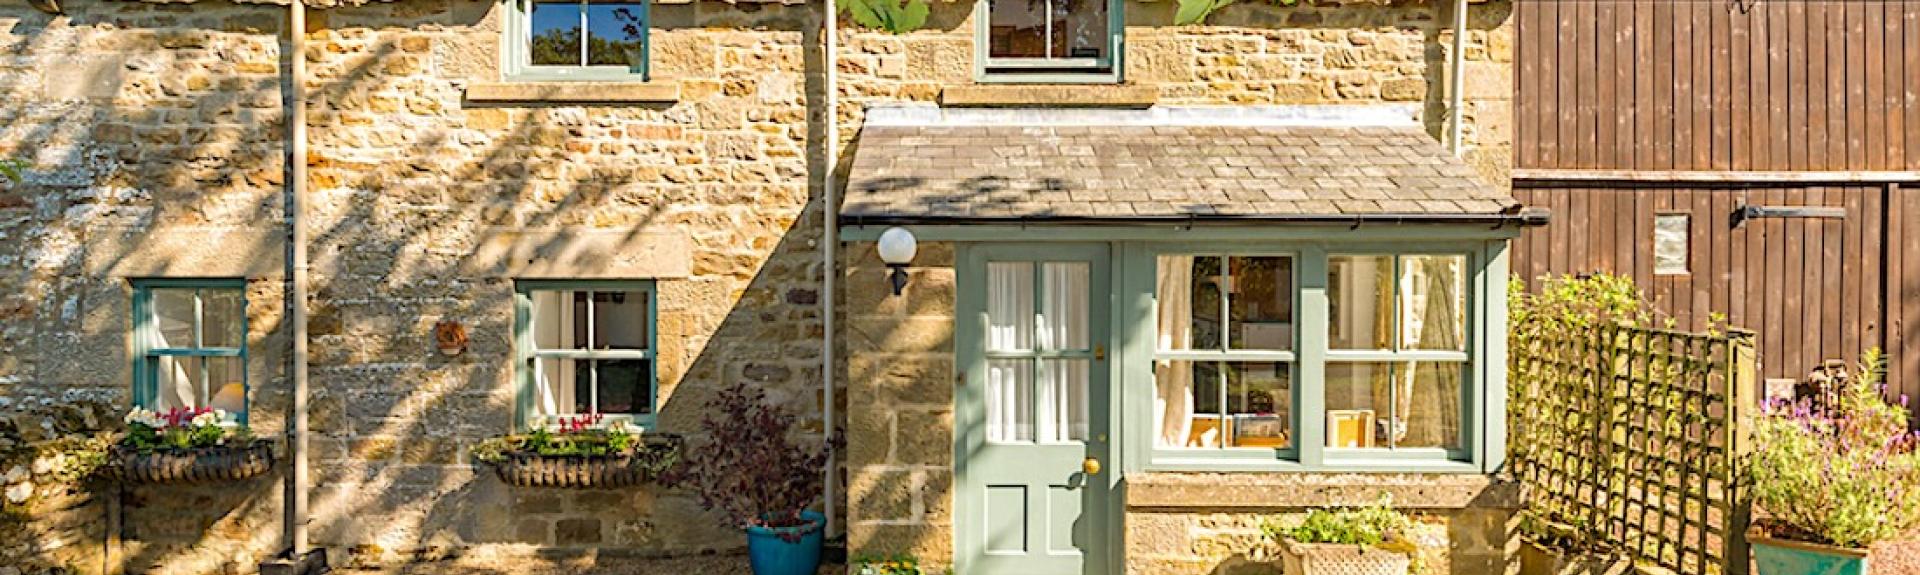 Exterior and front garden of a 2-storey stone-built Northumberland holidy cottage.